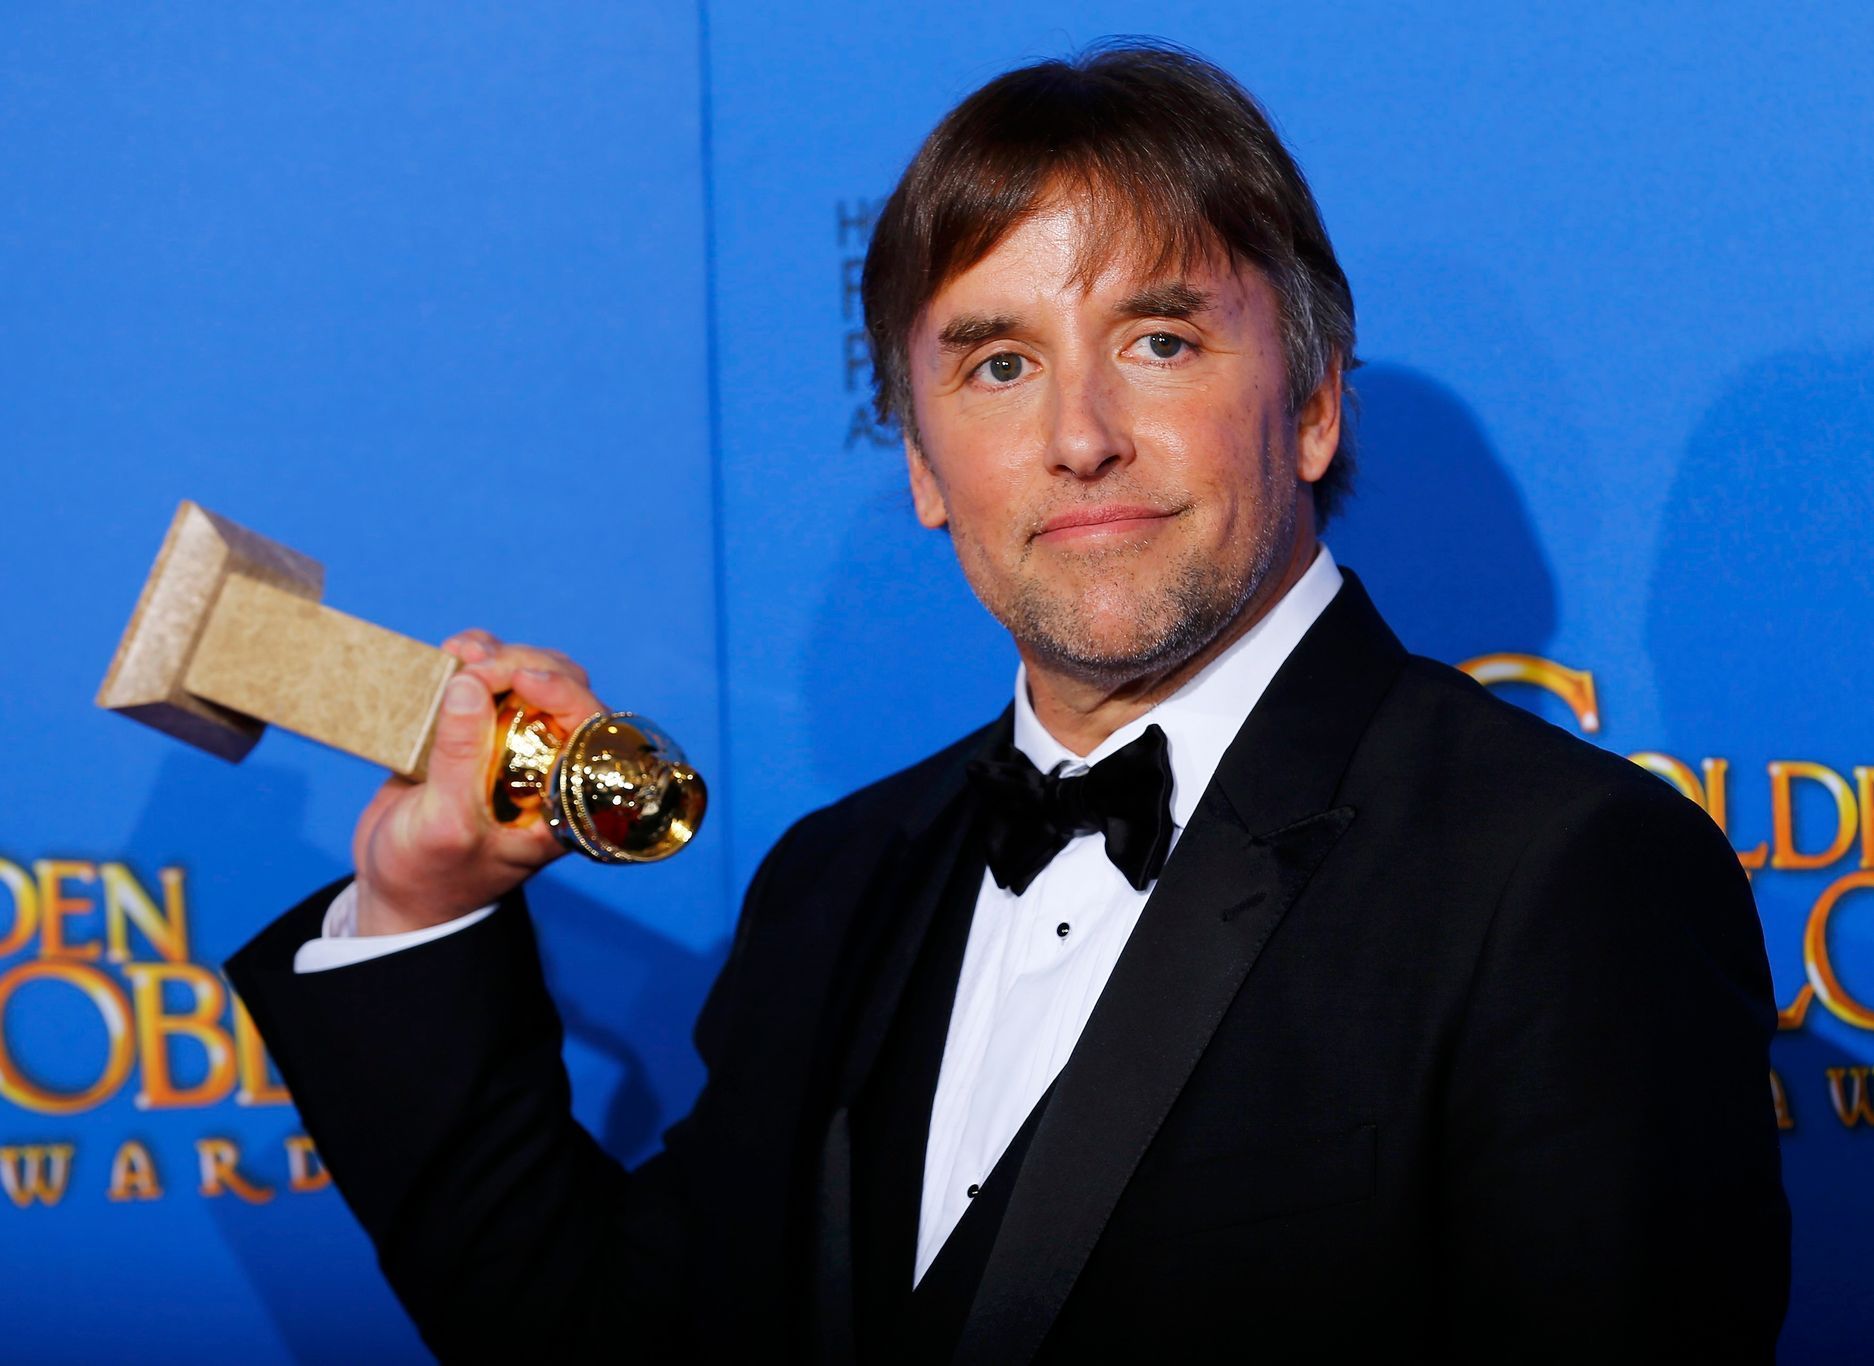 Richard Linklater poses with his award during the 72nd Golden Globe Awards in Beverly Hills